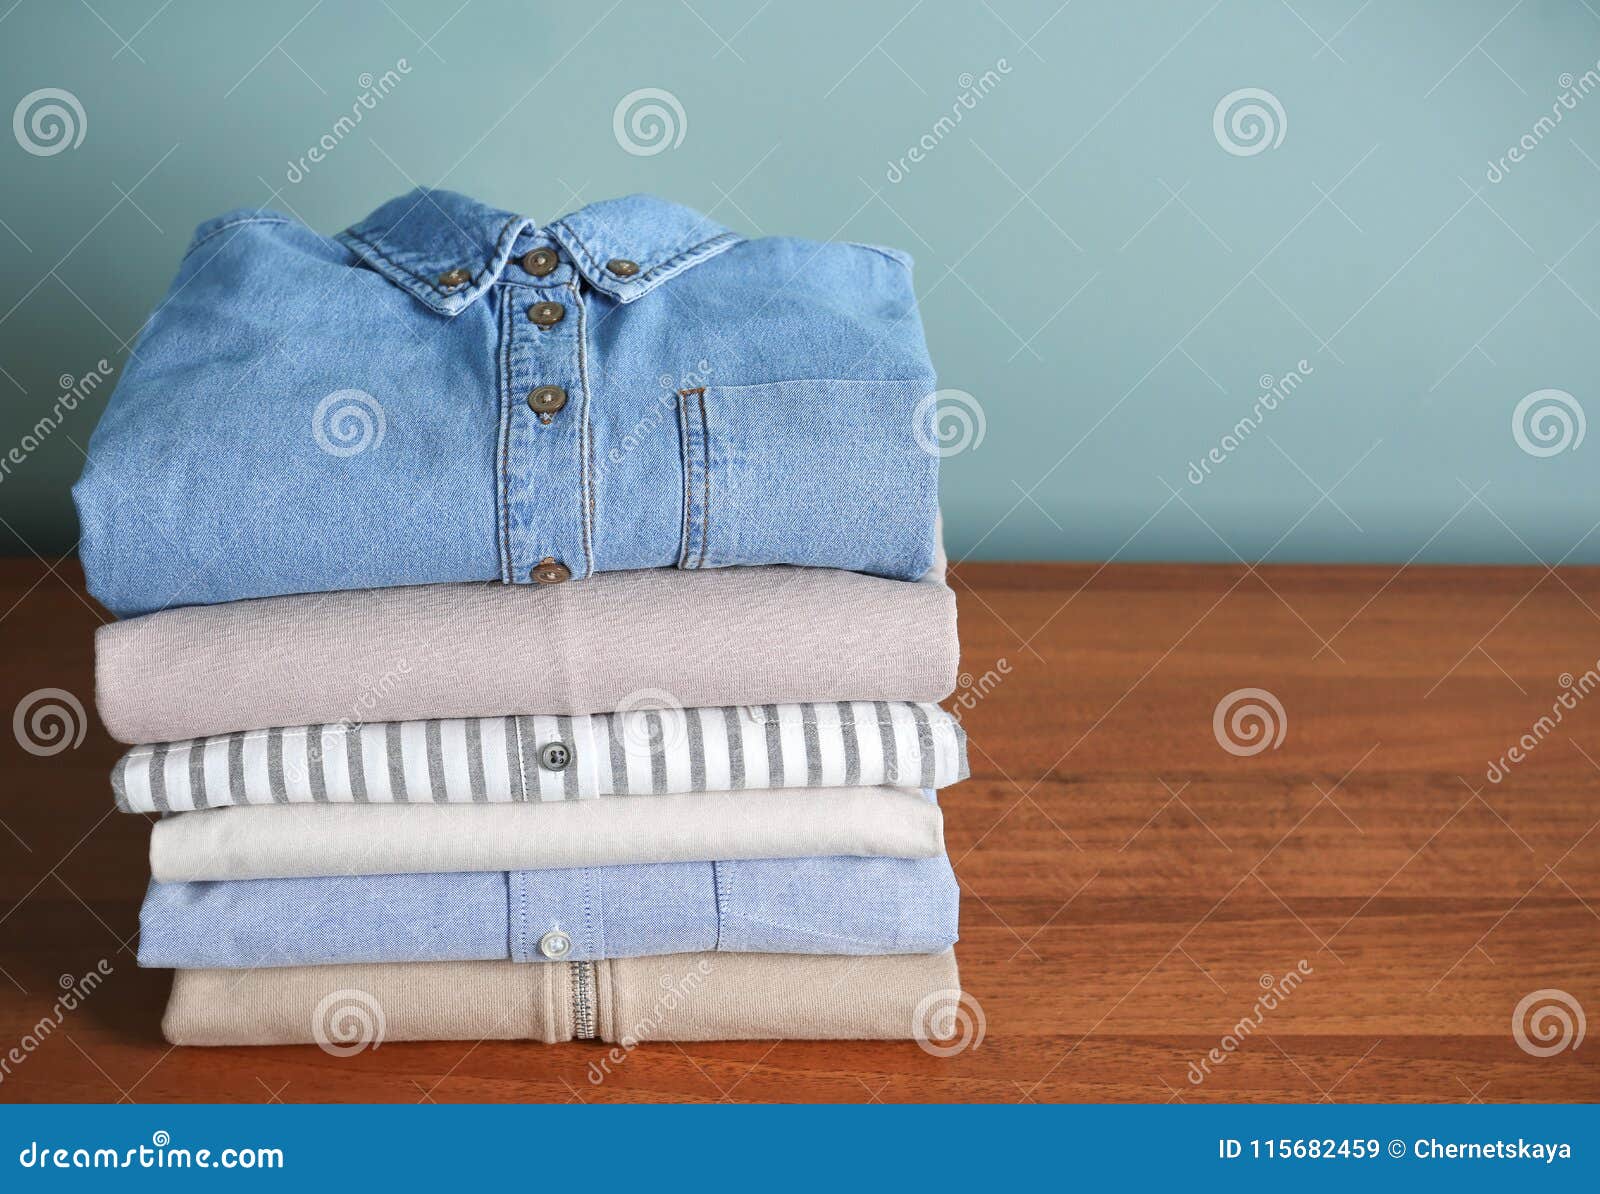 Stack of clothes on table stock image. Image of background - 115682459